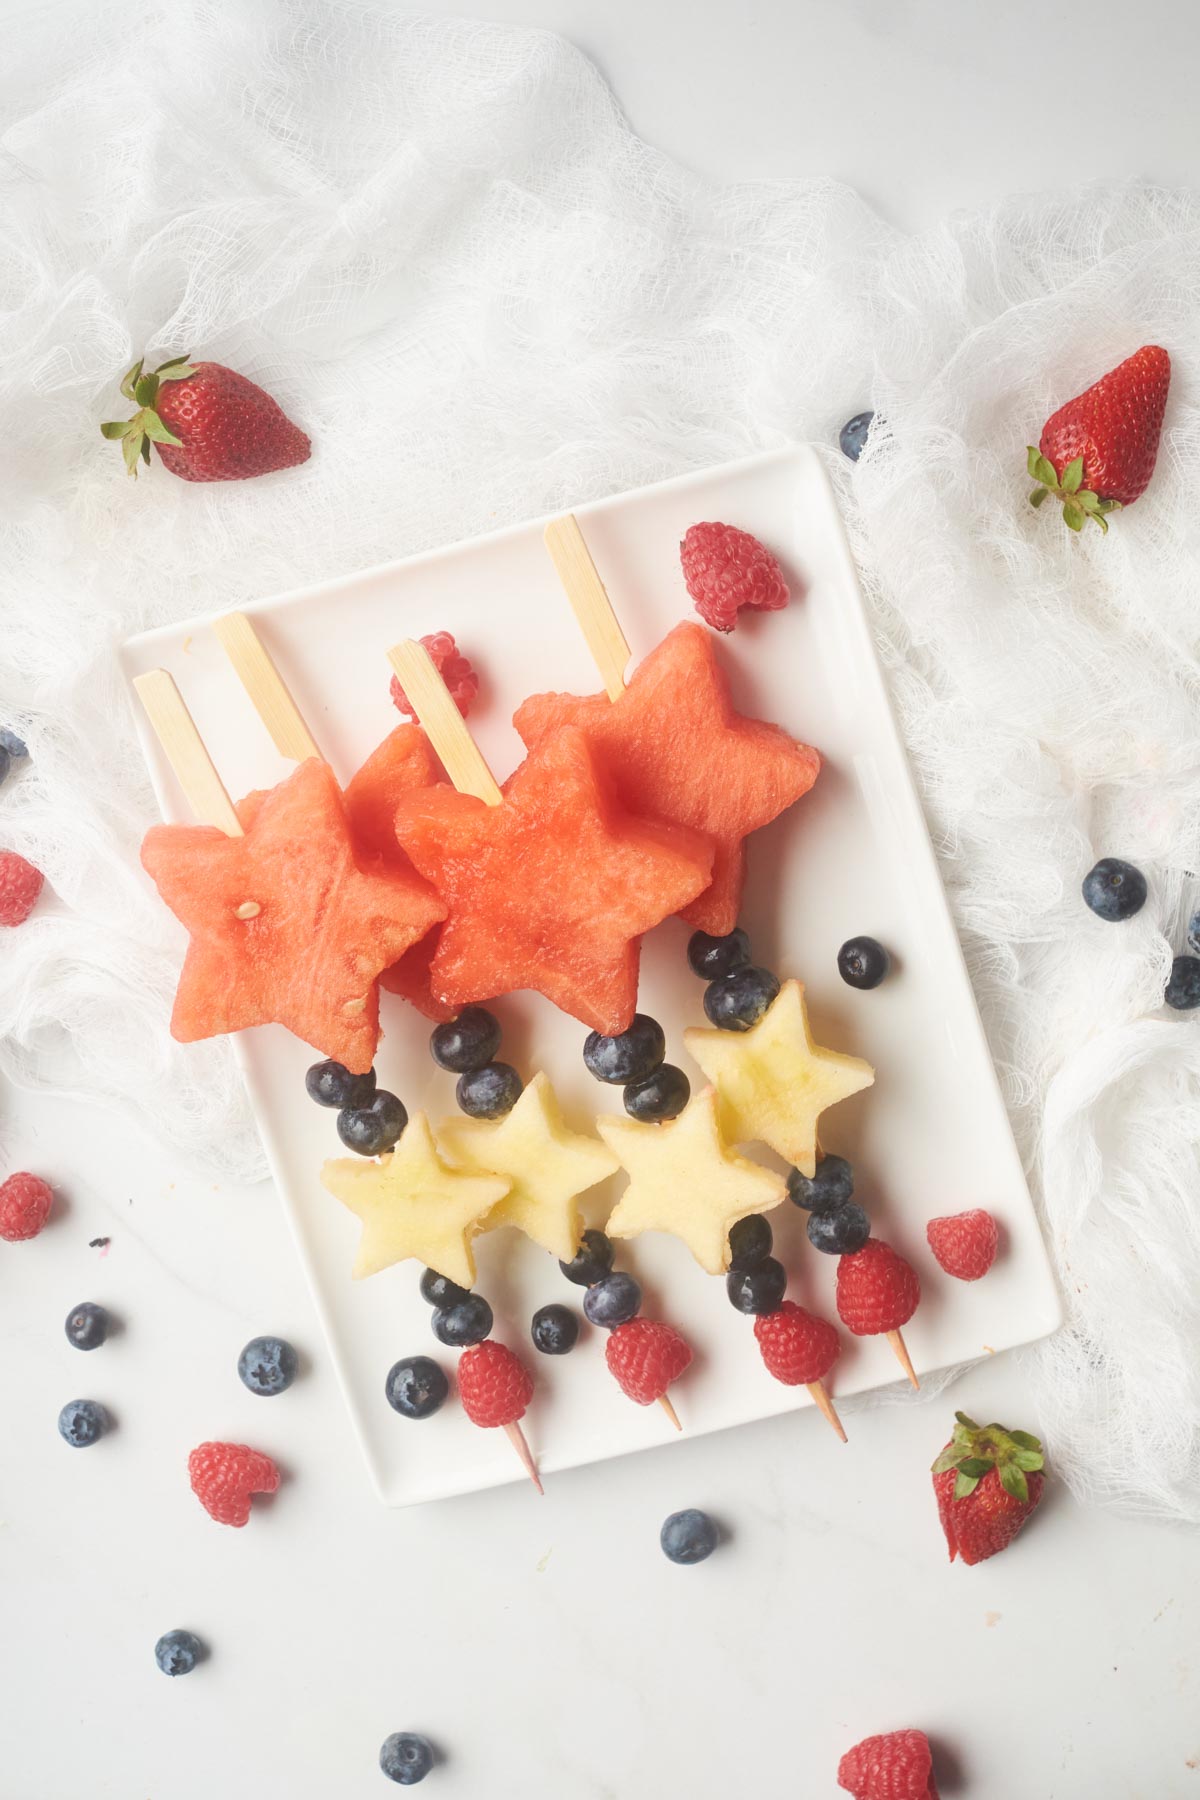 plateful of fourth of july fruit skewers with star shaped watermelon slices, berries and star shaped apple slices